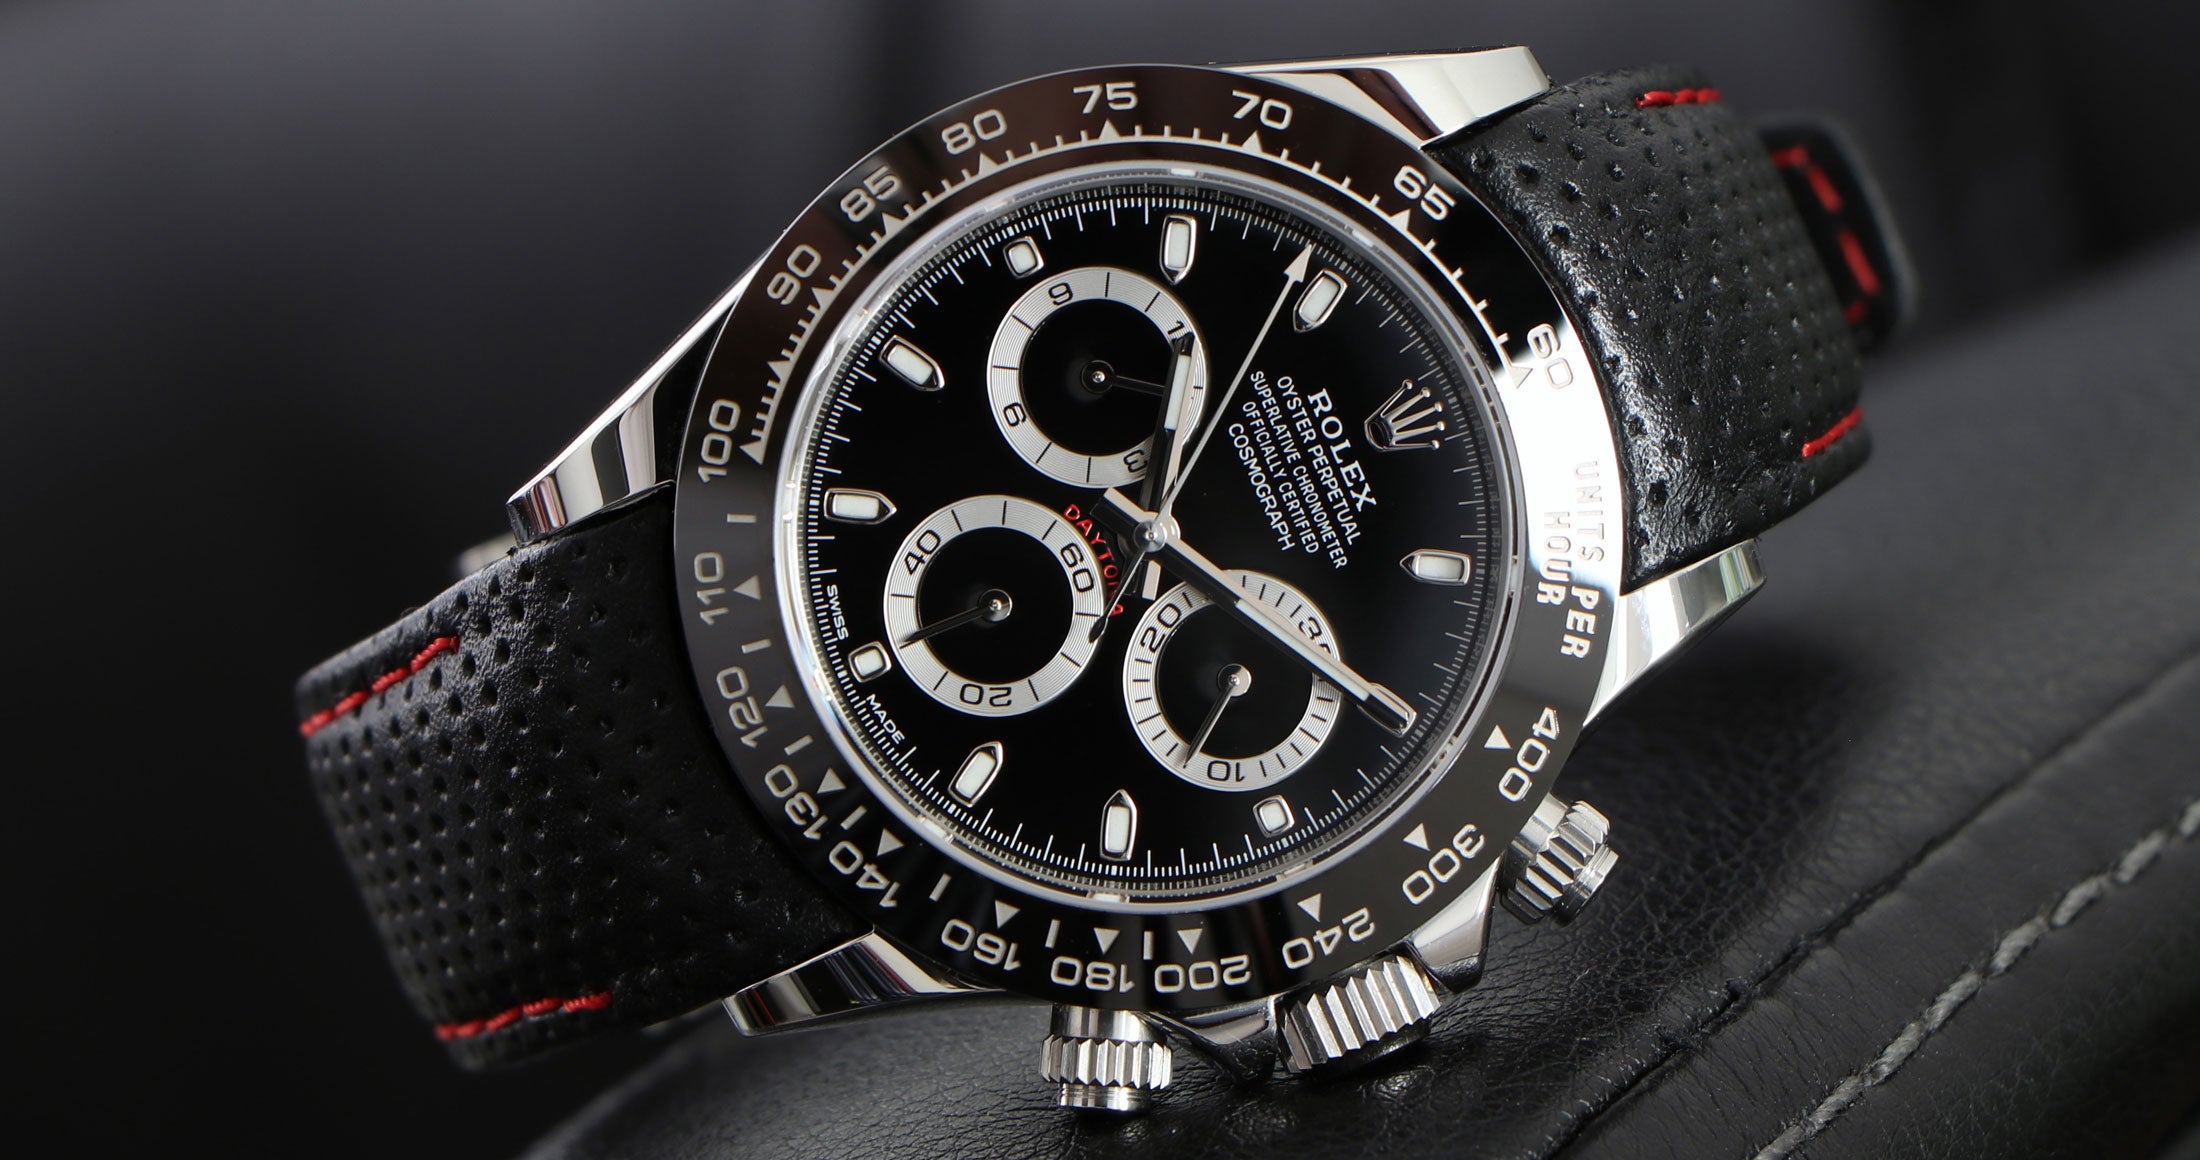 Perforated leather strap on Rolex Daytona - Black with Red Stitching